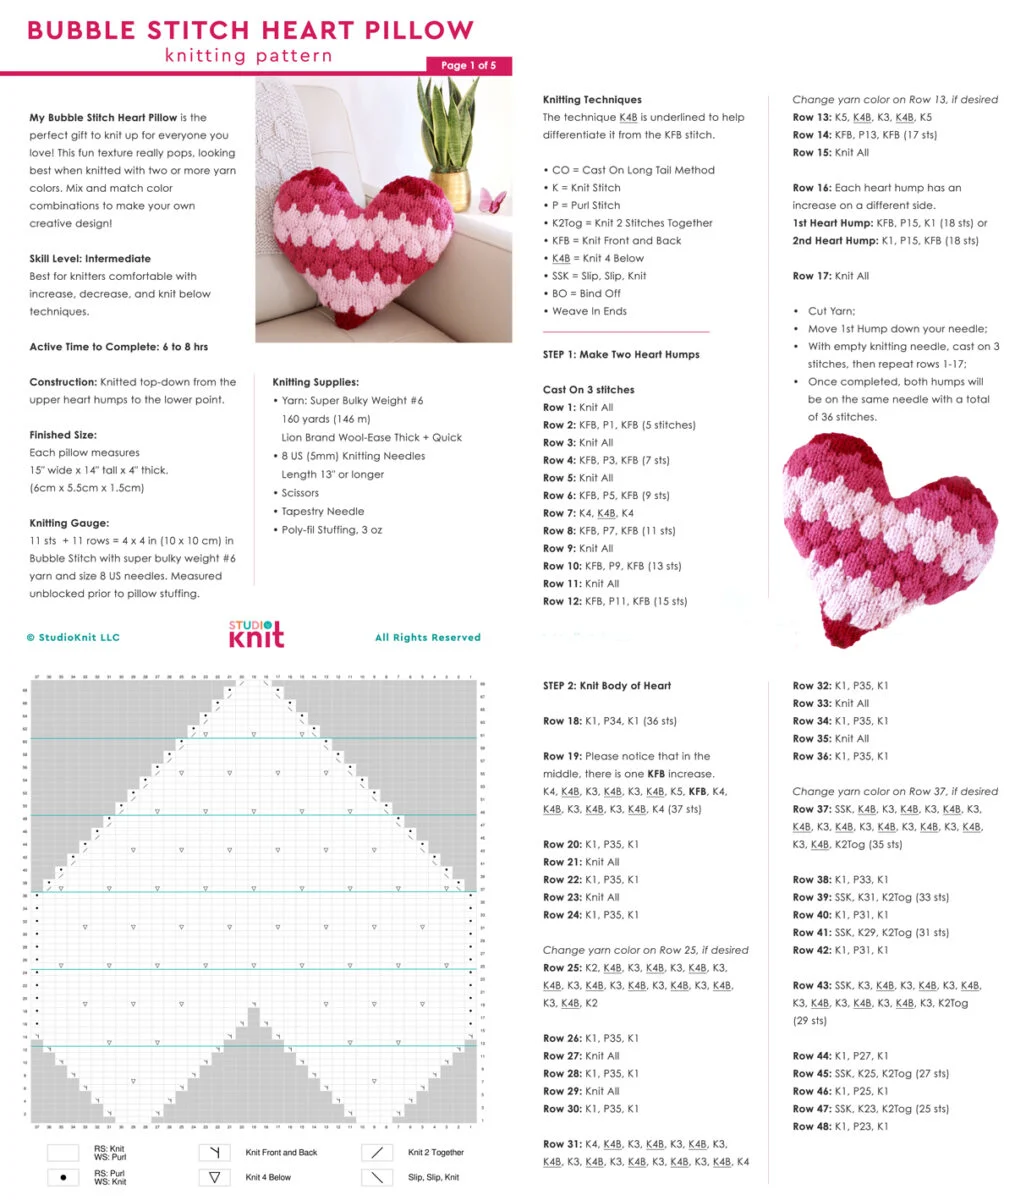 Printable knitting pattern of the Bubble Stitch Heart Pillow.